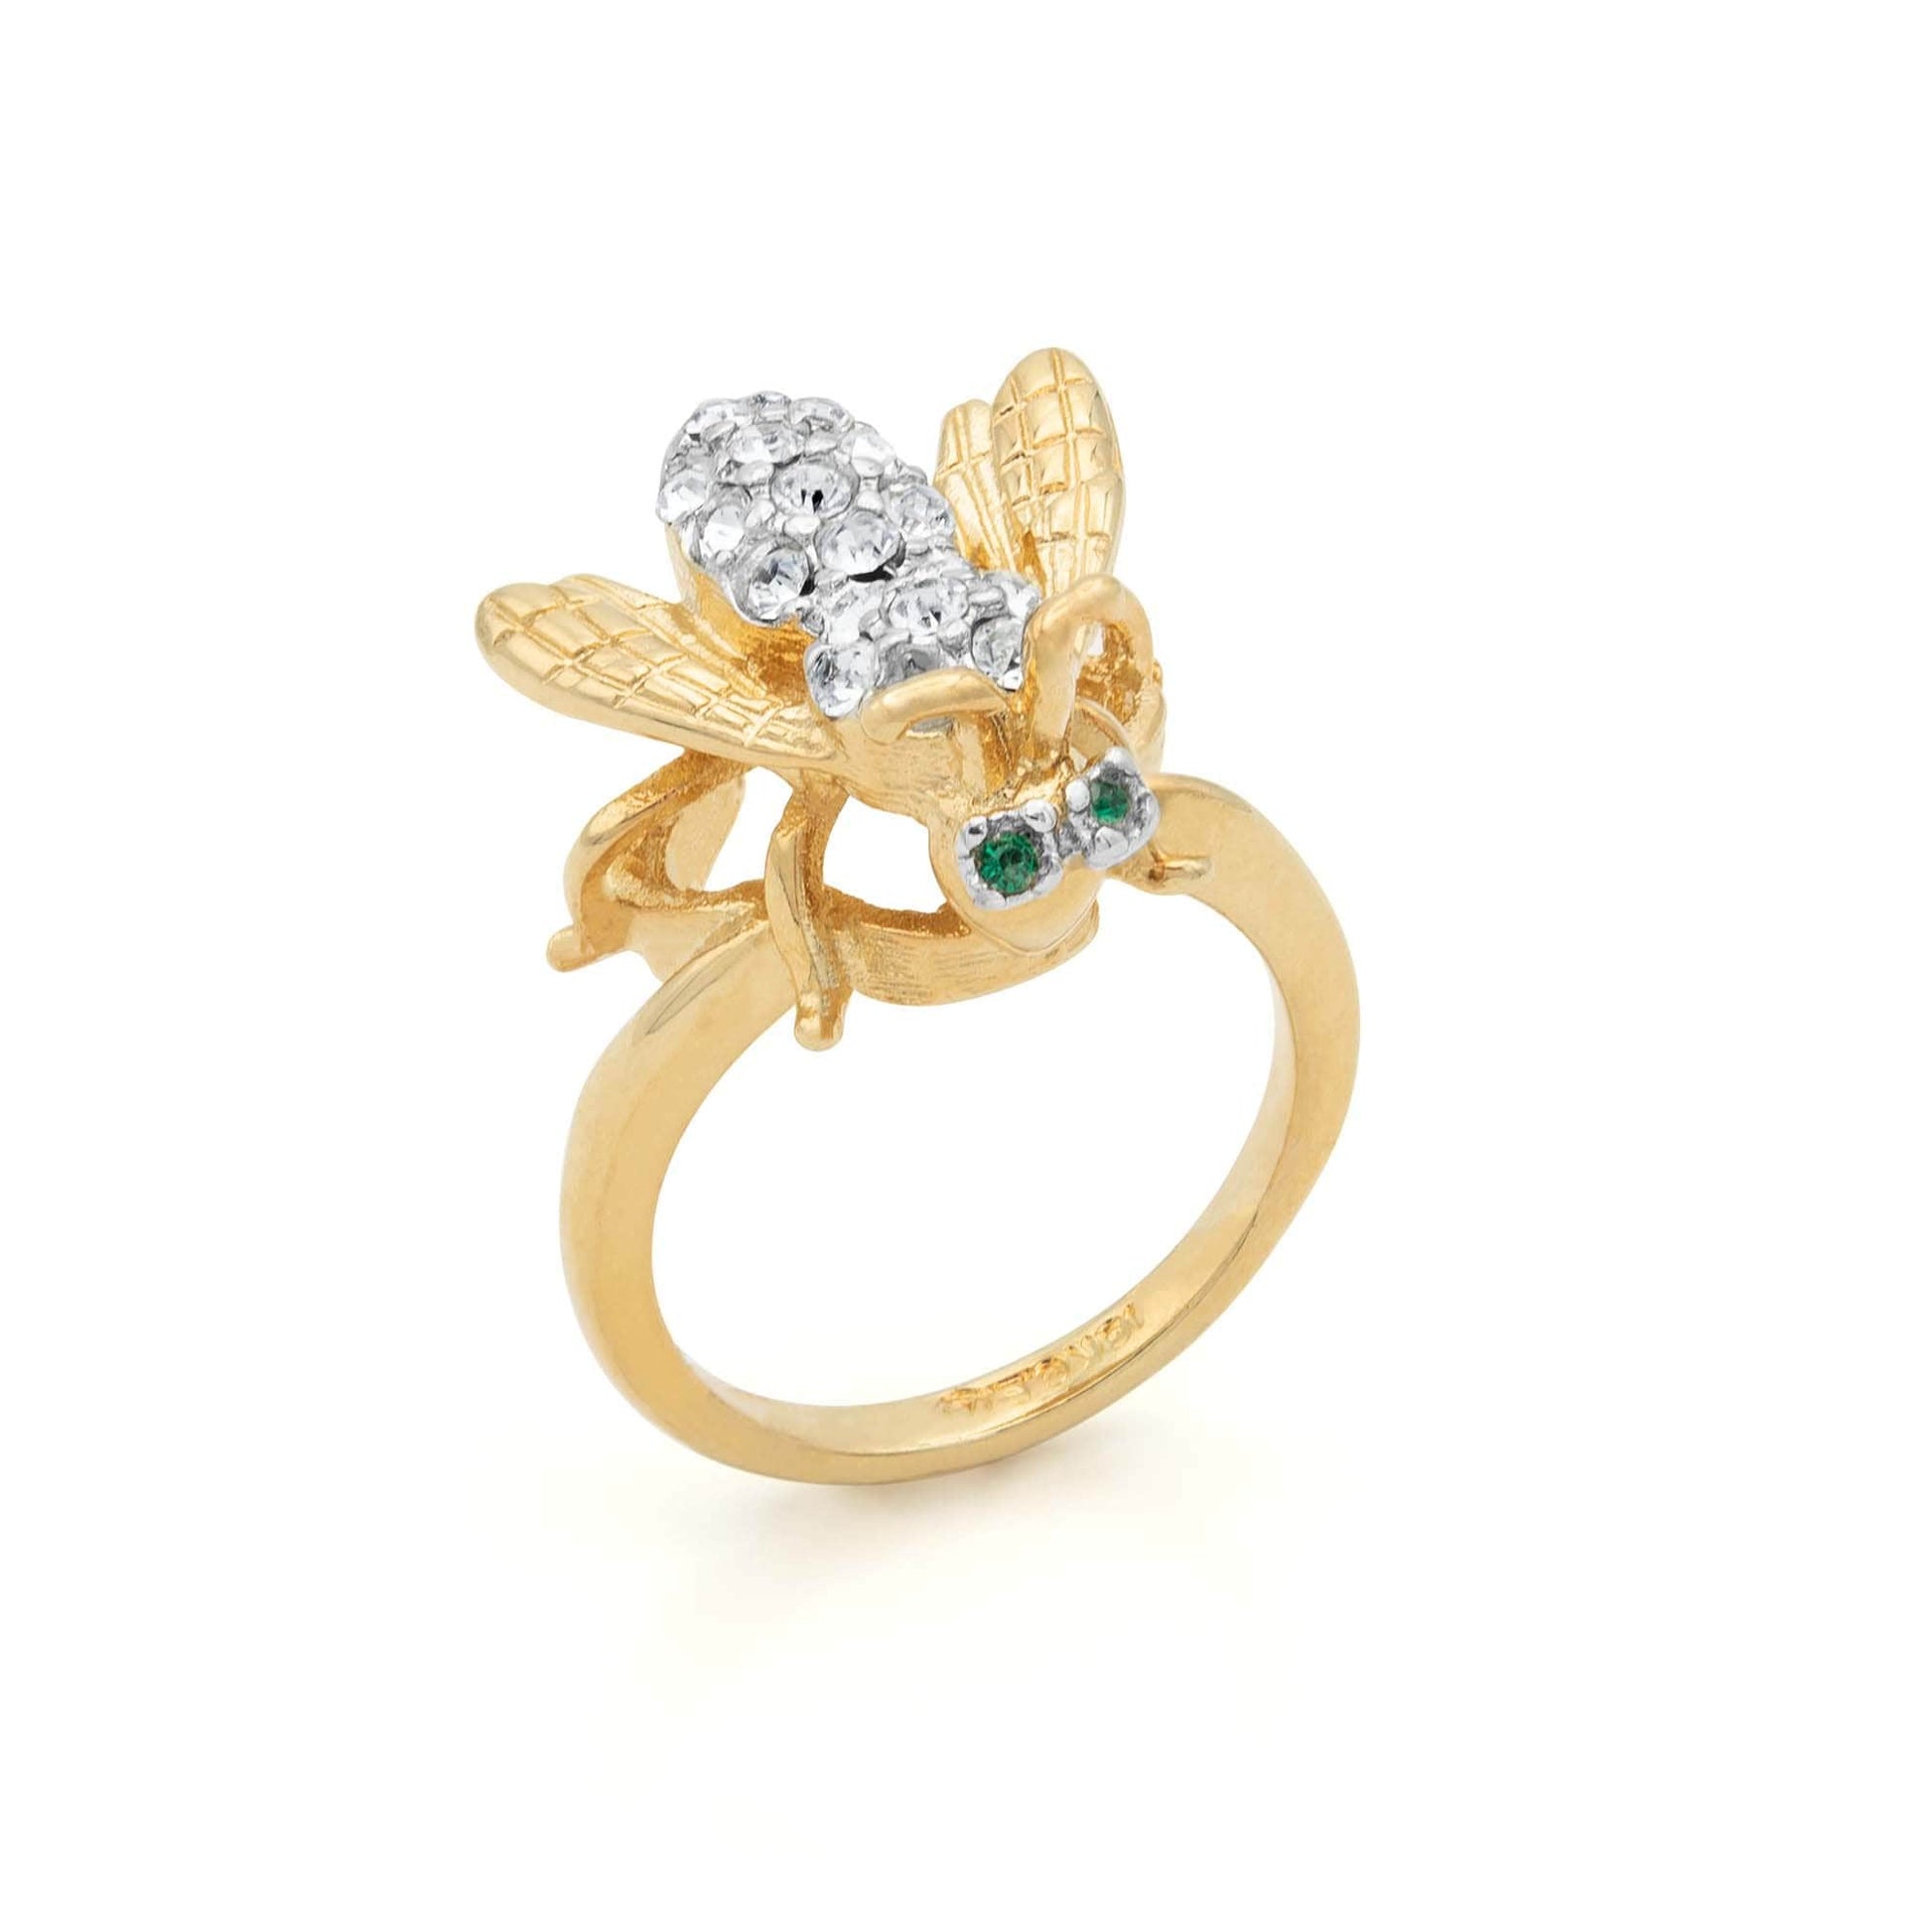 Vintage Bee Ring Emerald and Clear Austrian Crystals 18kt Gold  #R785 Antique Rings - Limited Stock - Never Worn